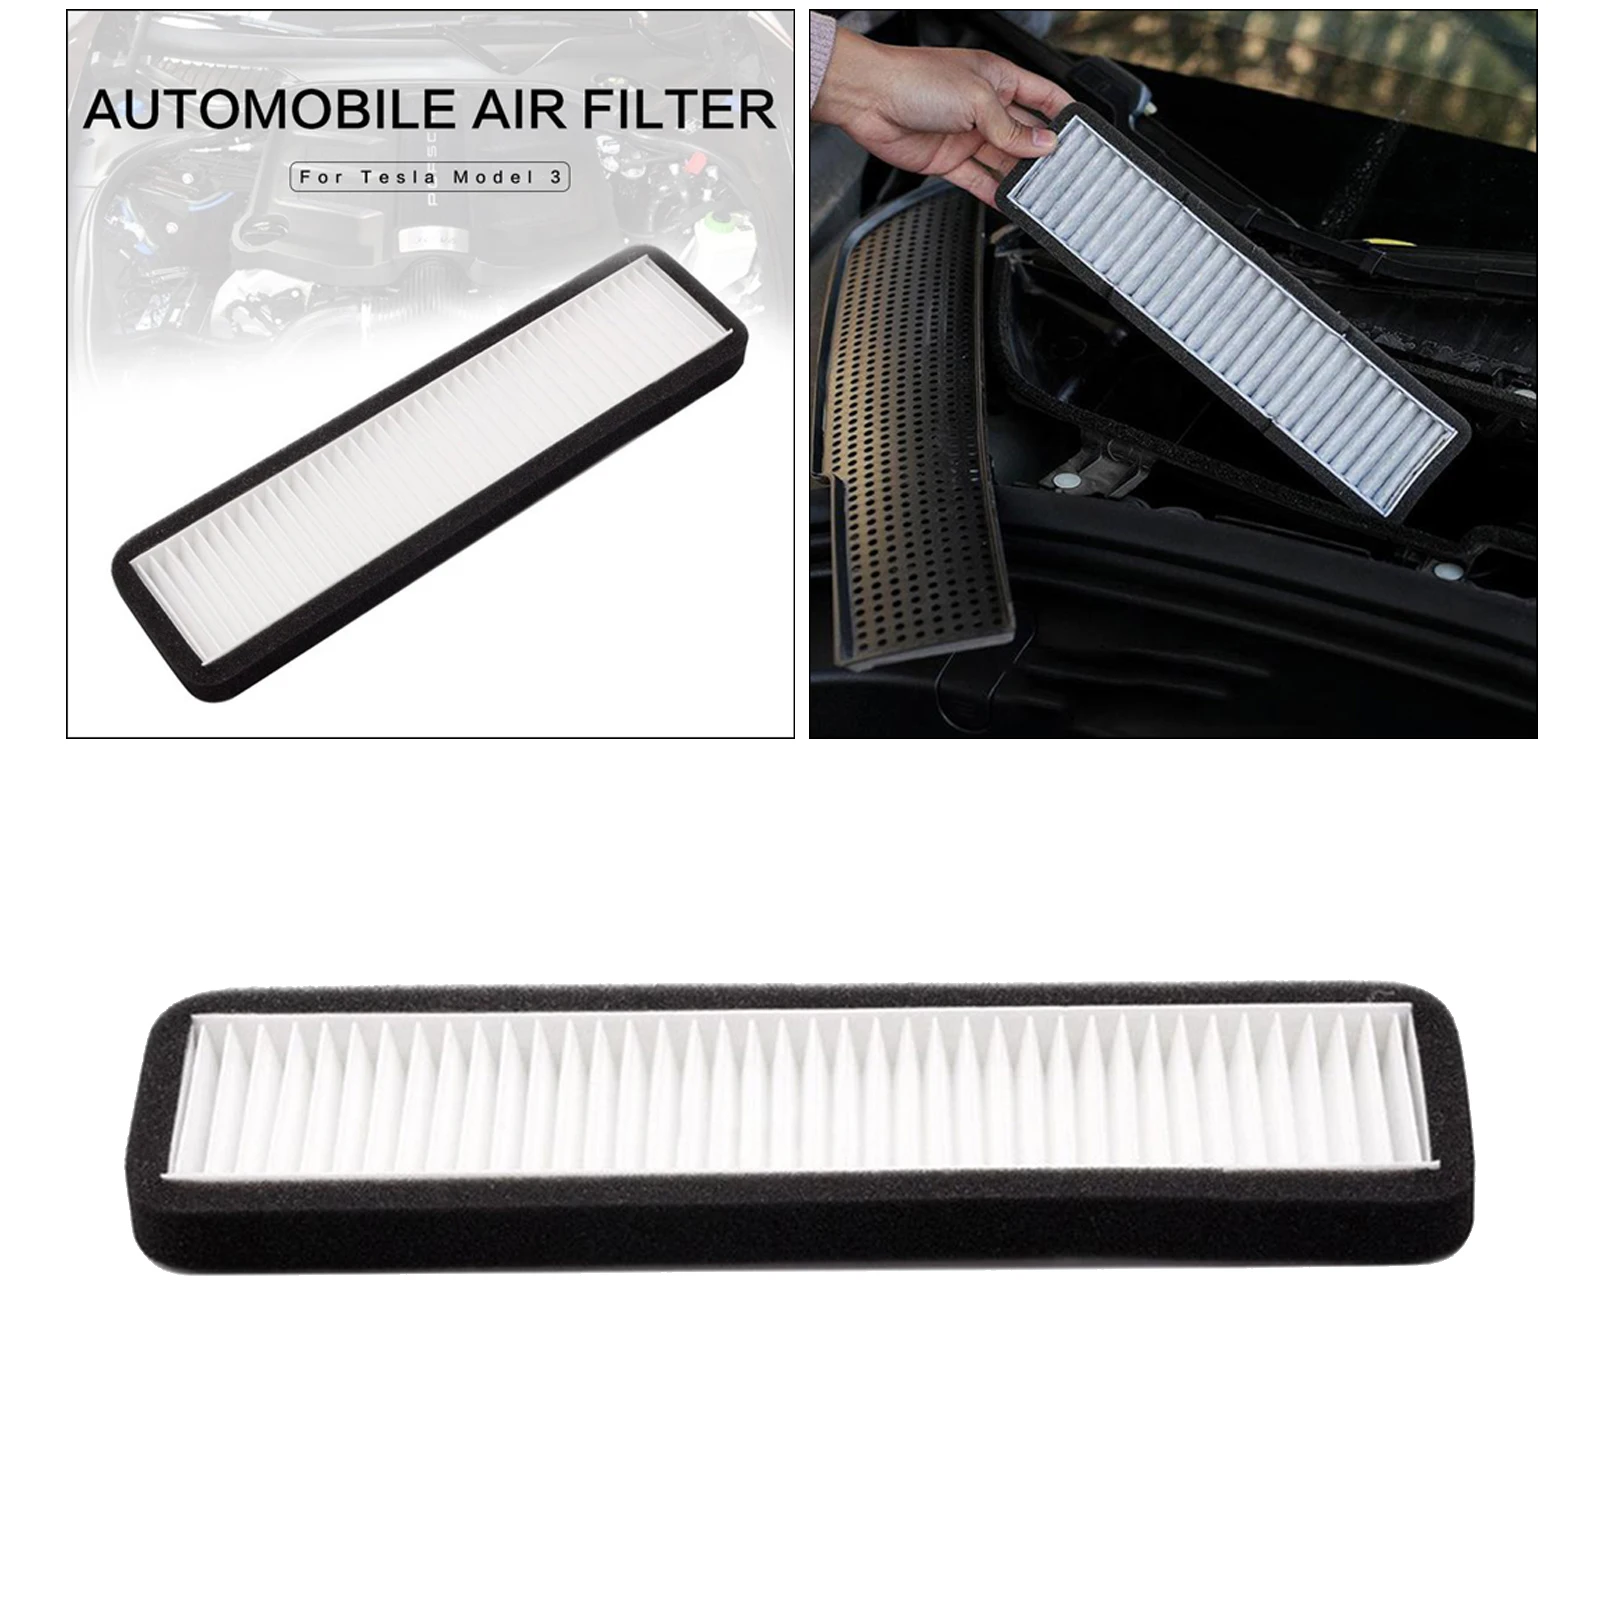 Applicable Air Conditioning Filter Conversion Activated Carbon Effective Blocking PM2.5 For Tesla Model 3 Accessories